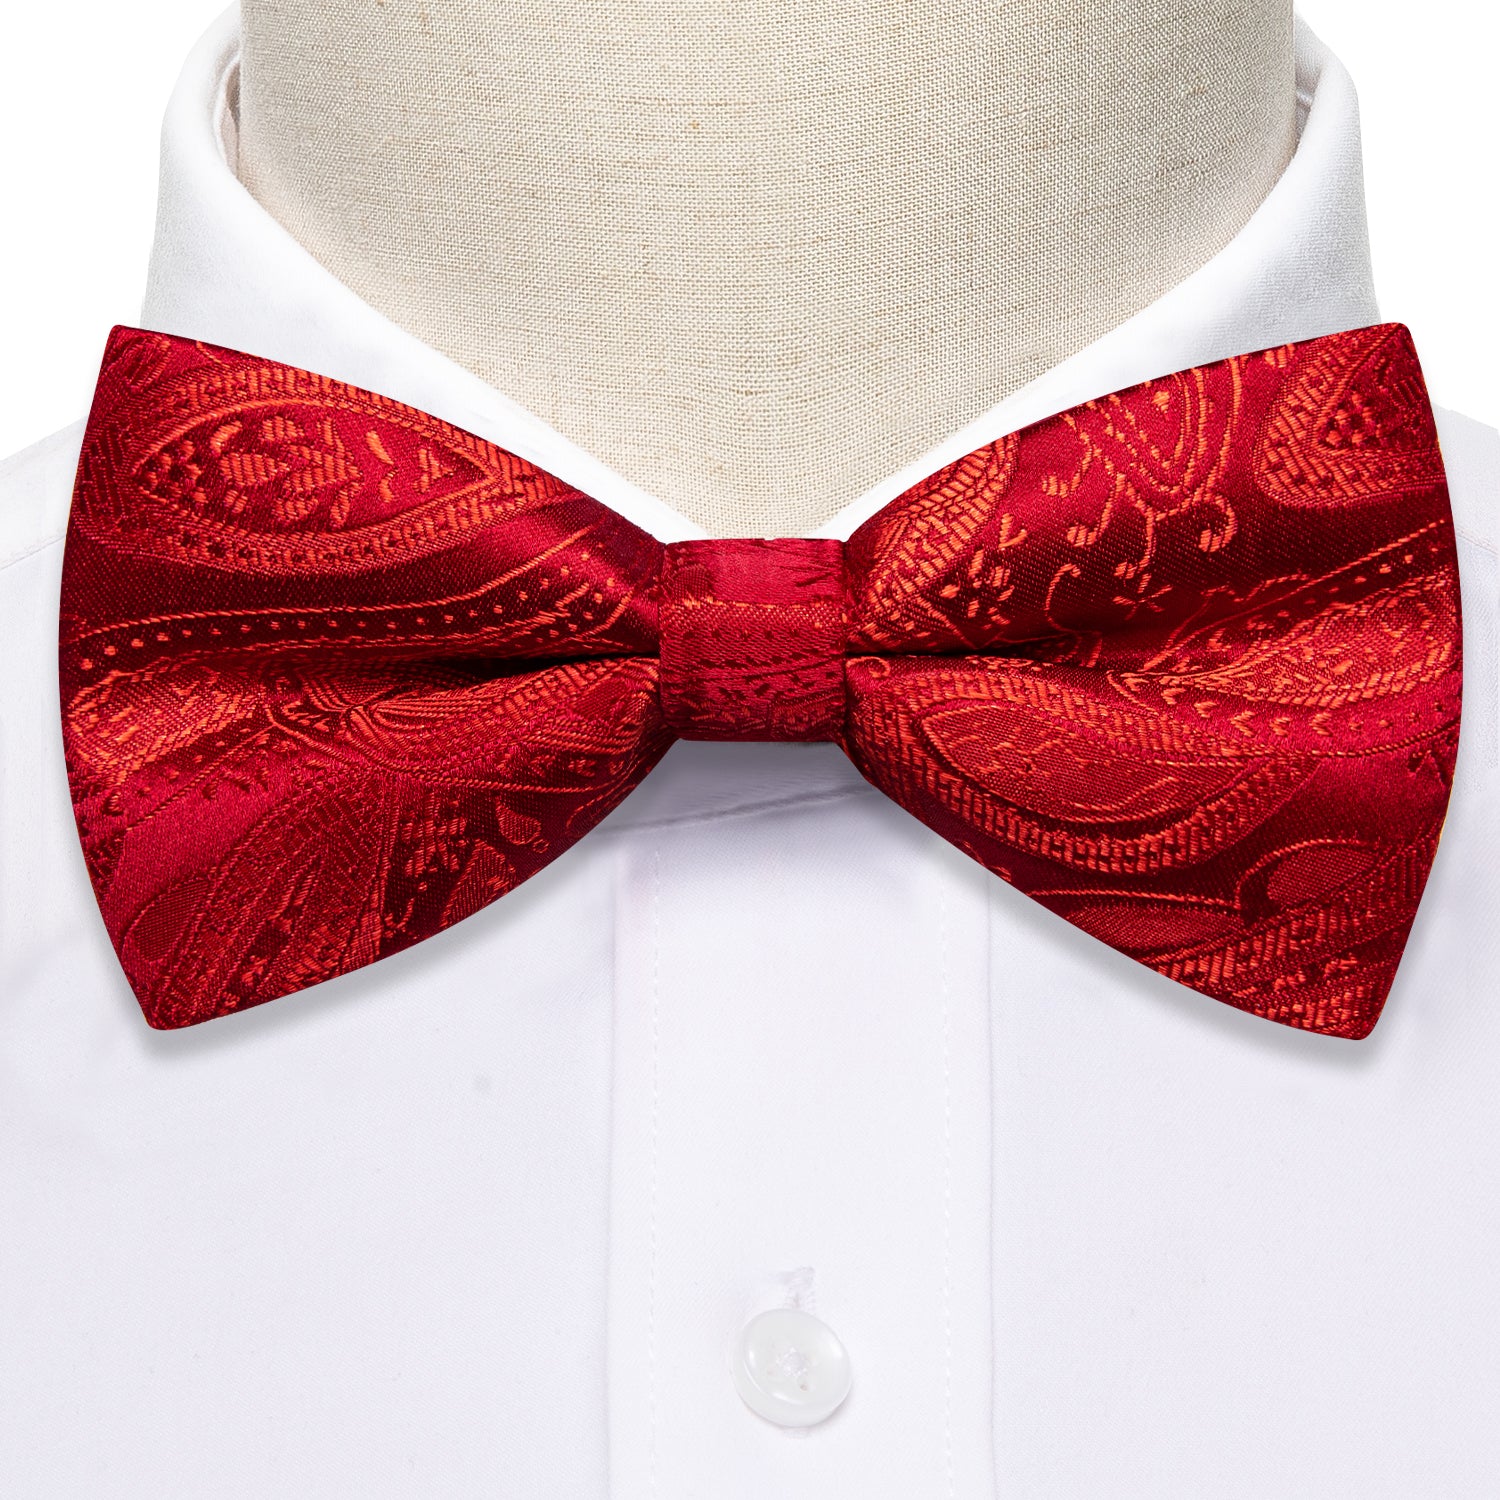 Strong Red Paisley Pre-tied Bow Tie Hanky Cufflinks Set